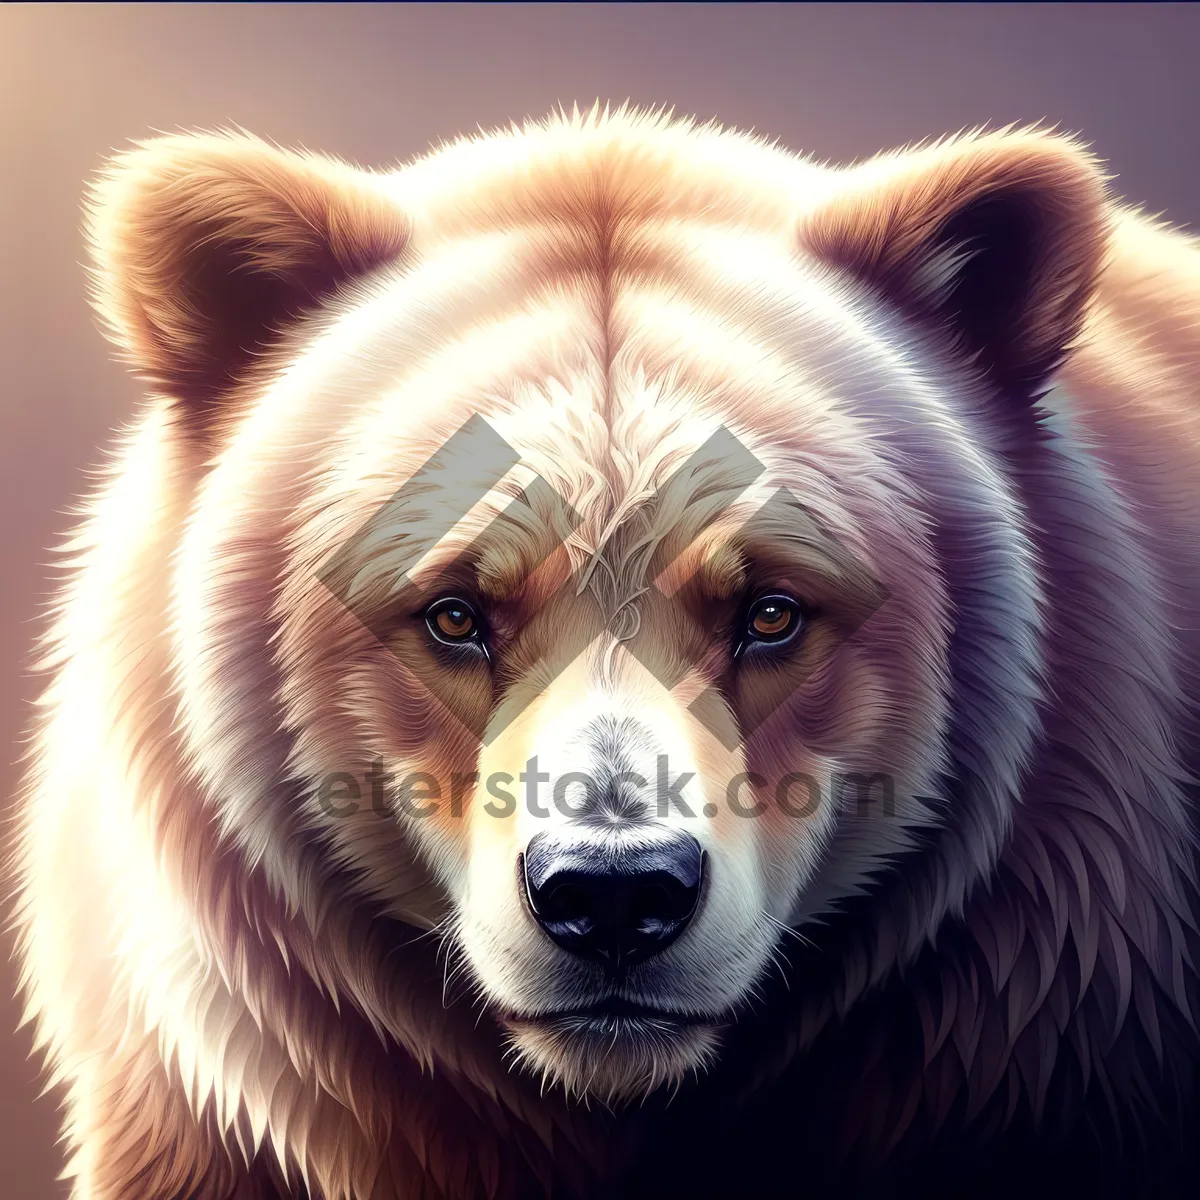 Picture of Fierce Brown Bear - Majestic and Wild